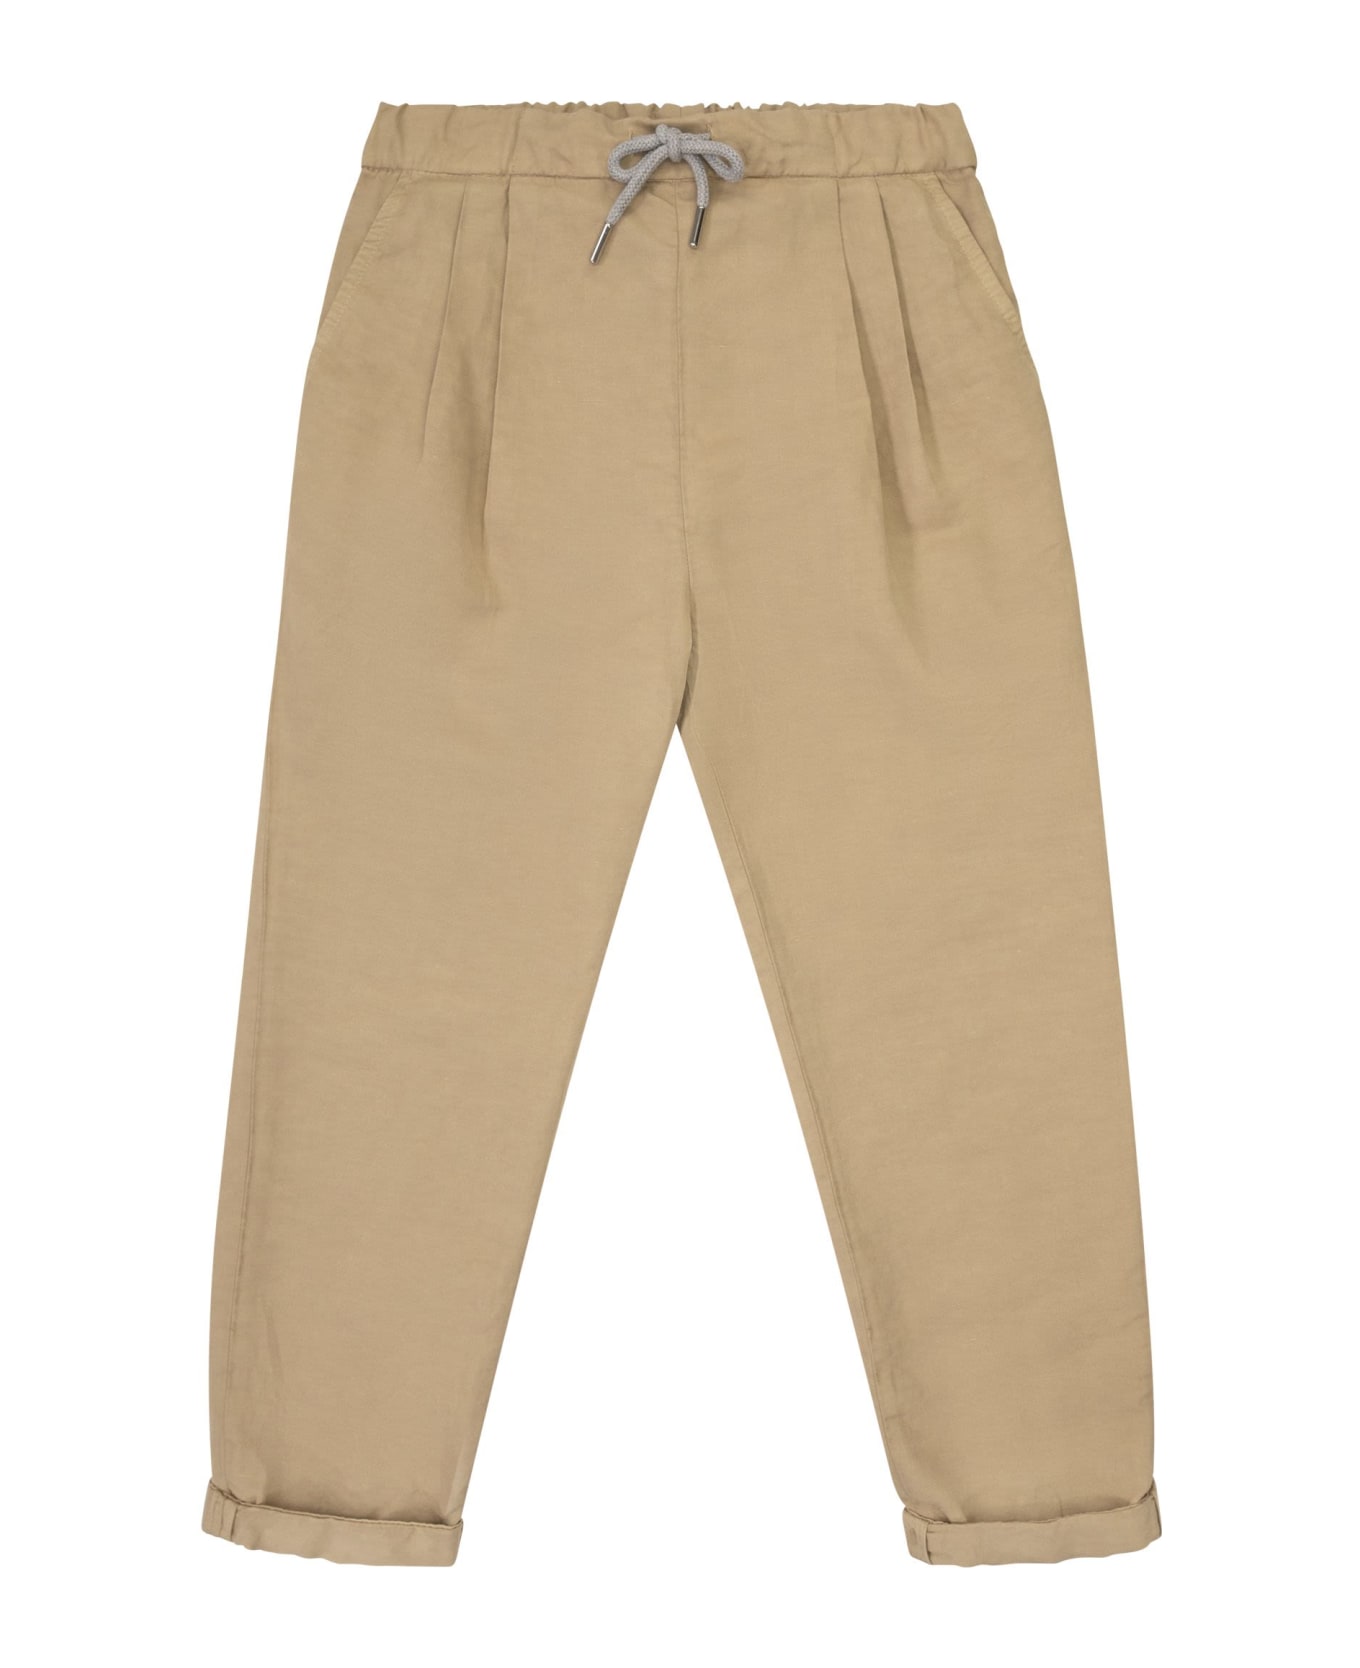 Brunello Cucinelli Garment Dyed Linen And Twisted Cotton Gabardine Trousers With Drawstring - Beige